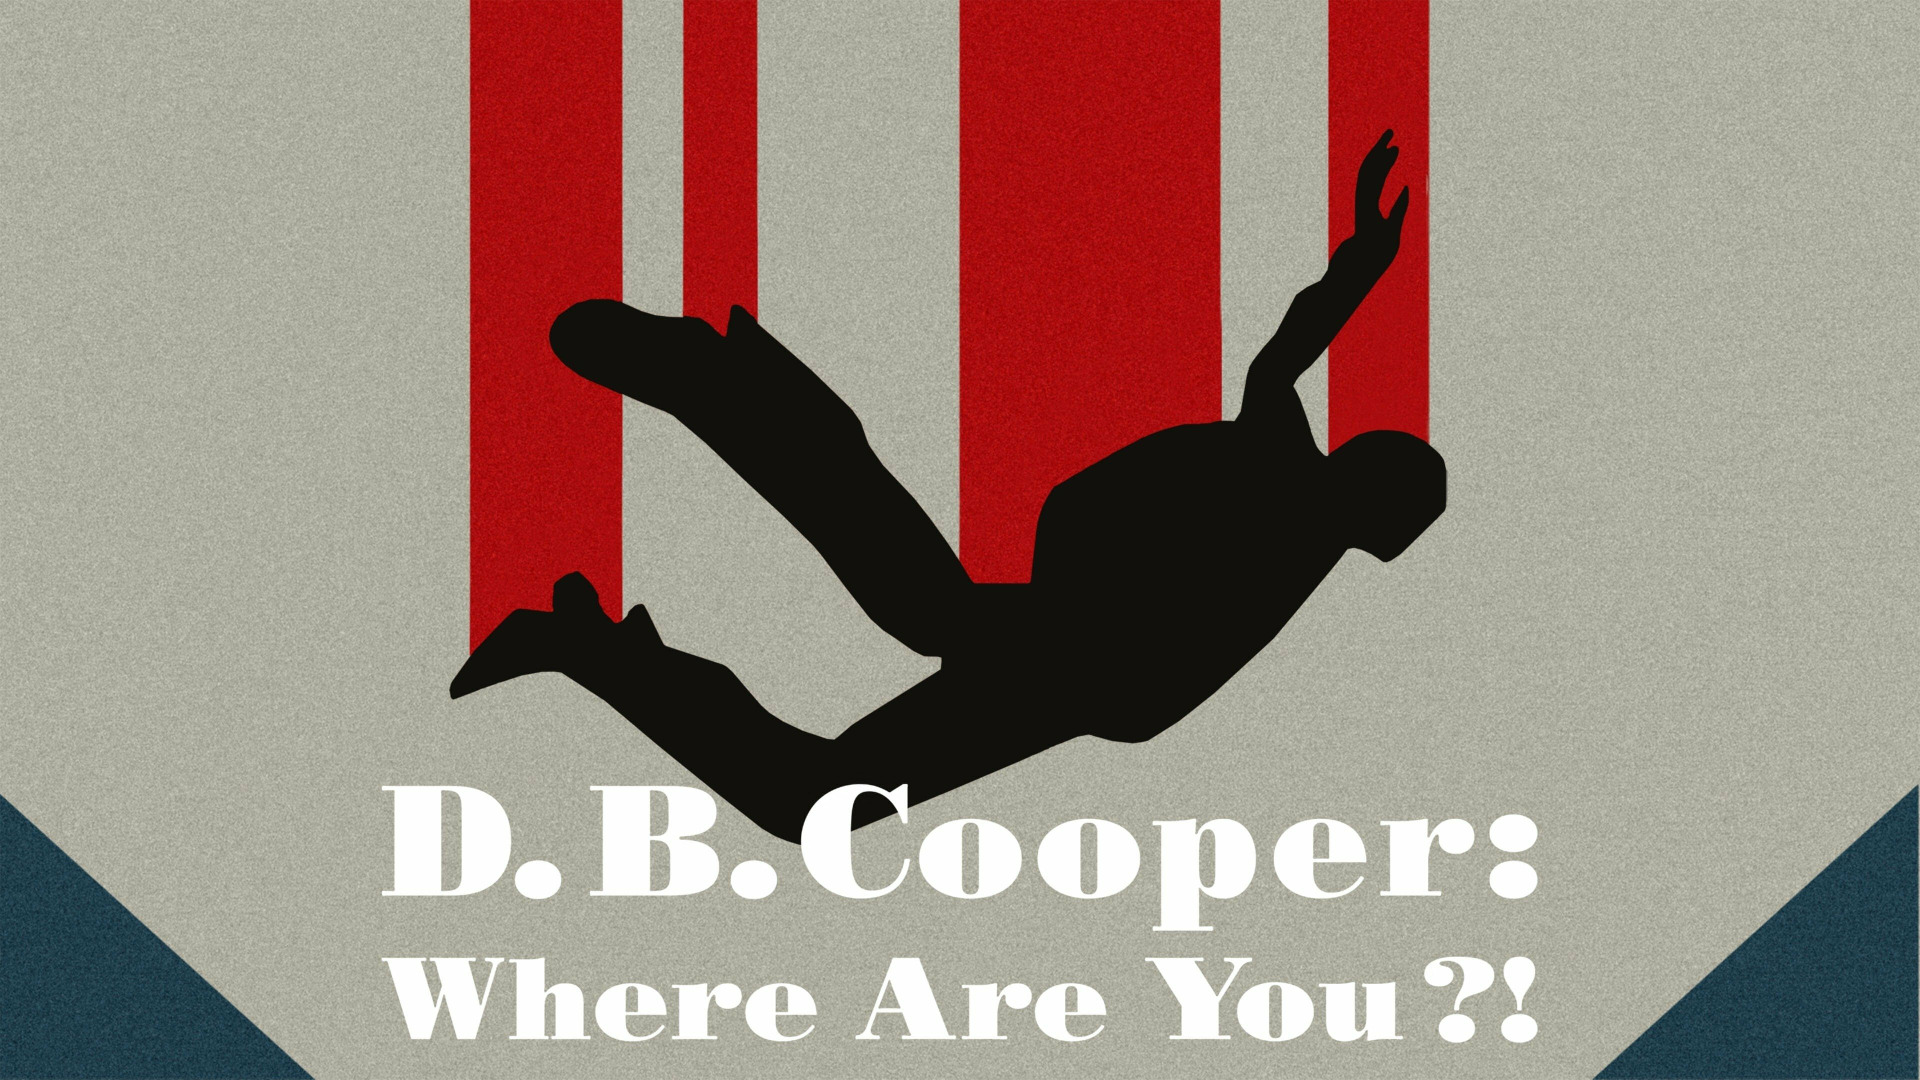 Show D.B. Cooper: Where Are You?!